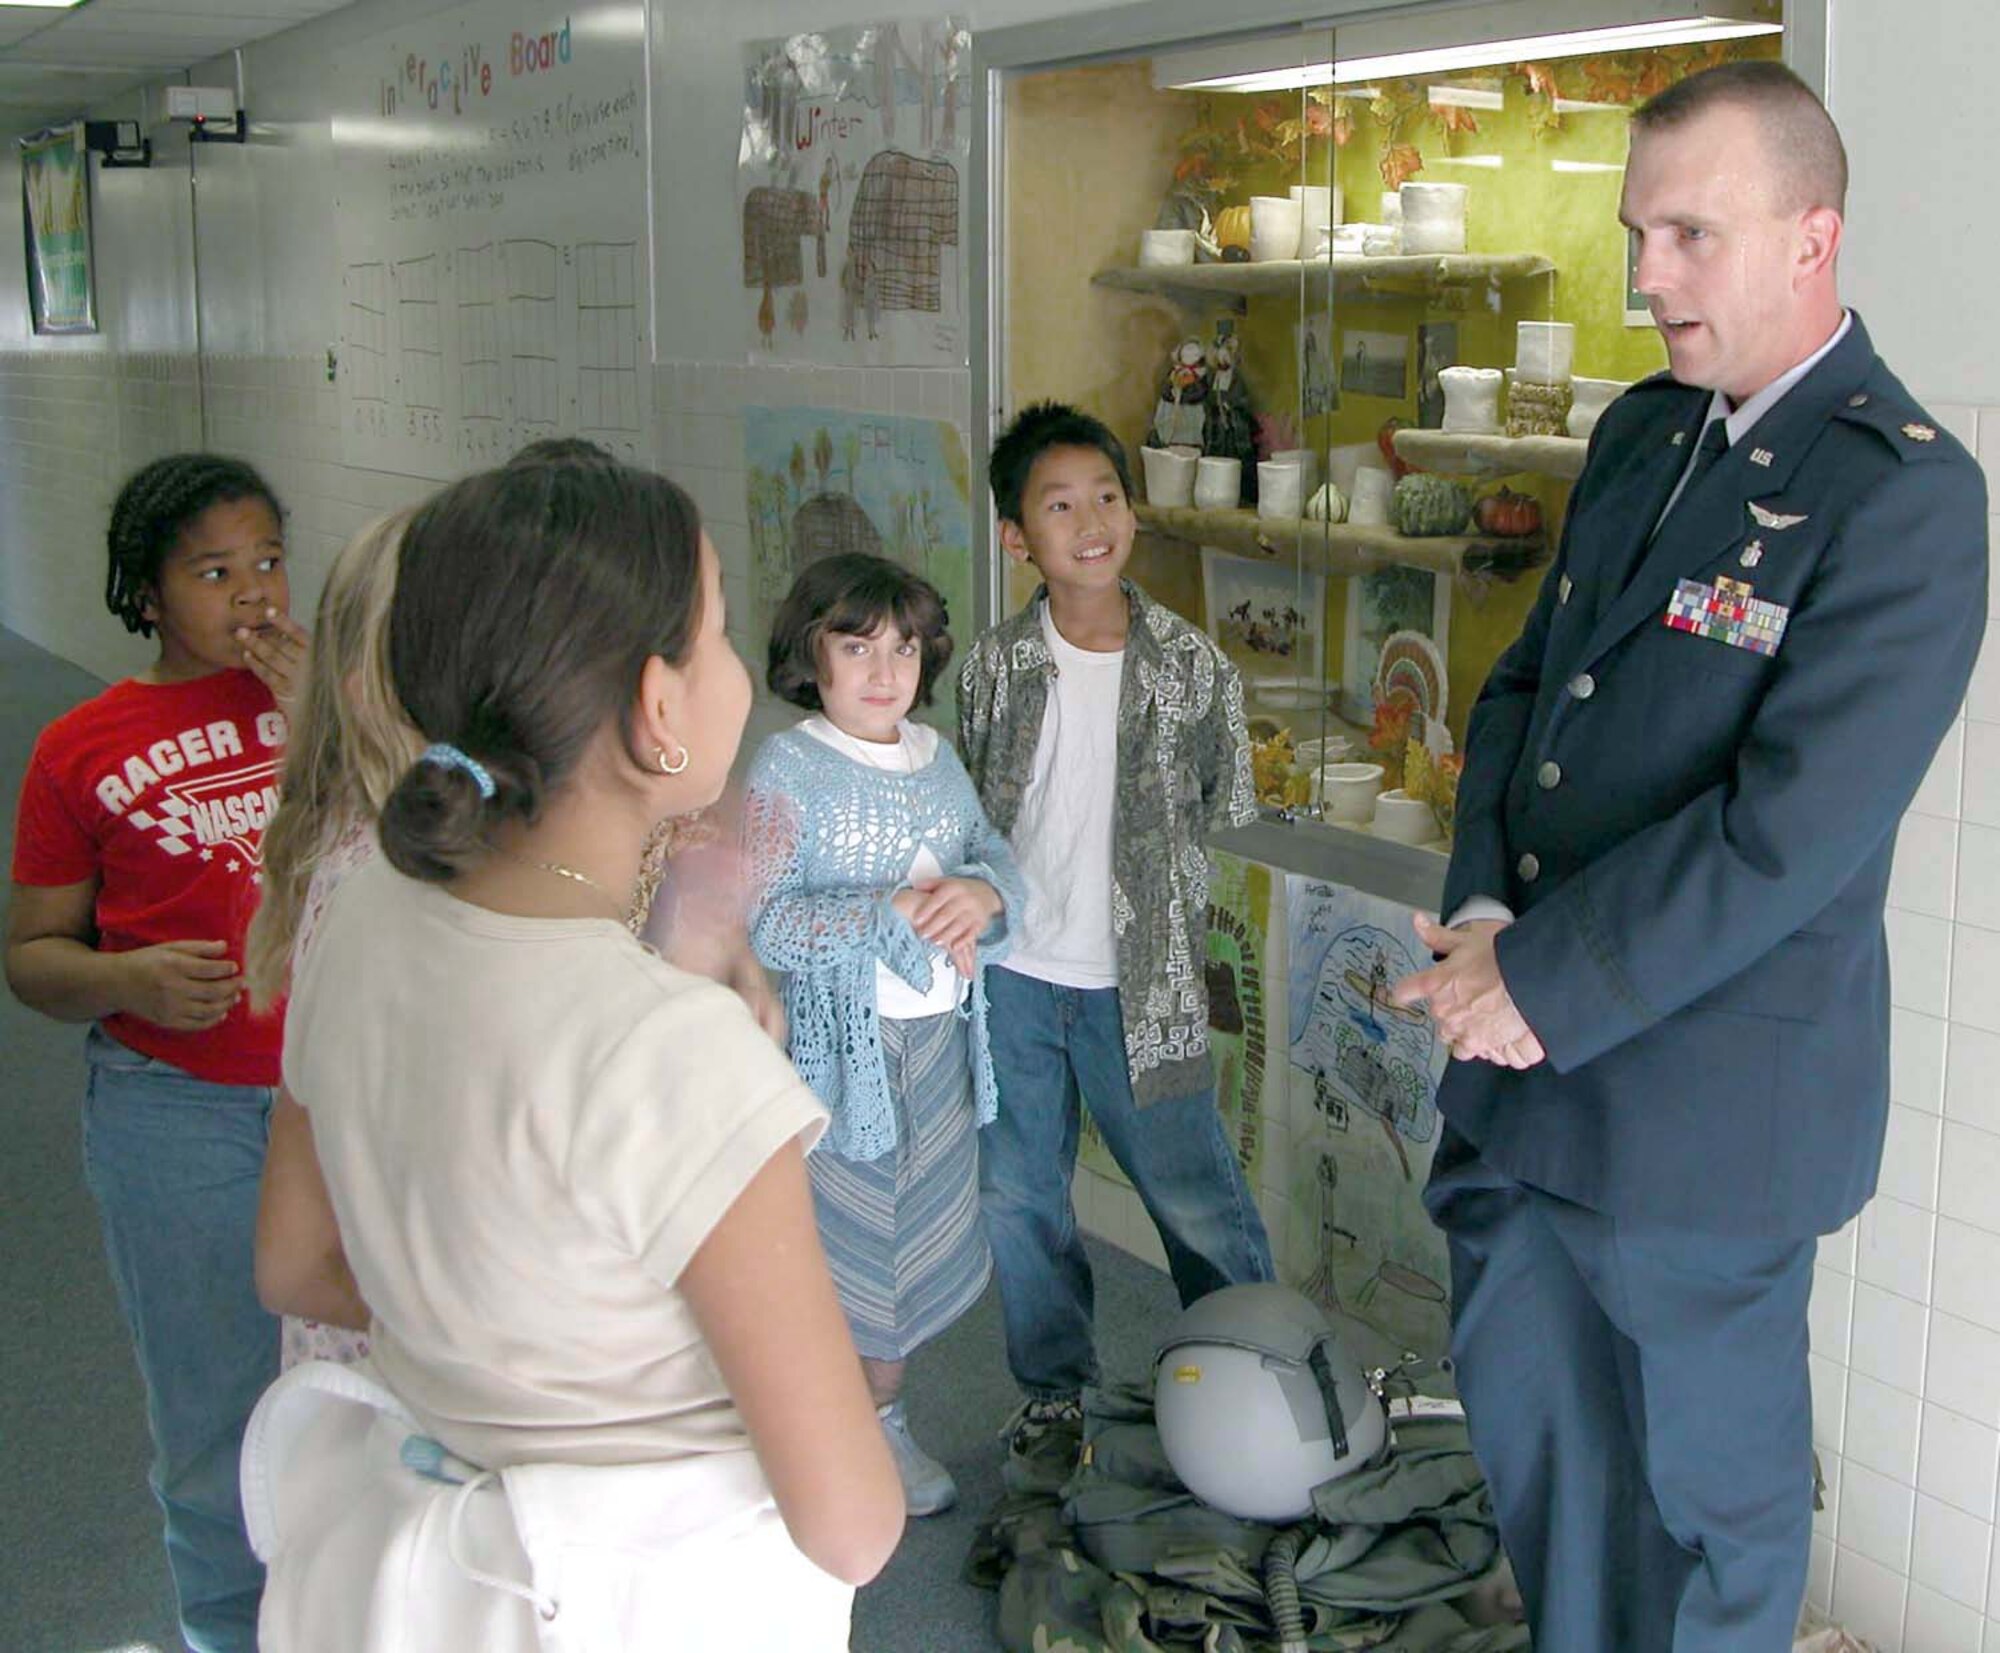 WASHINGTON -- Maj. Mike Lundy talks with a few of his "Baghdad Buddies" in the hallway at Bren Mar Park Elementary School after a brief ceremony Nov. 21 welcoming him home from Iraq.  He was deployed to Baghdad for four months with the 11th Medical Group.  He is the chief of public health at Bolling Air Force Base, D.C.  (U.S. Army photo by Sgt. 1st Class Doug Sample)